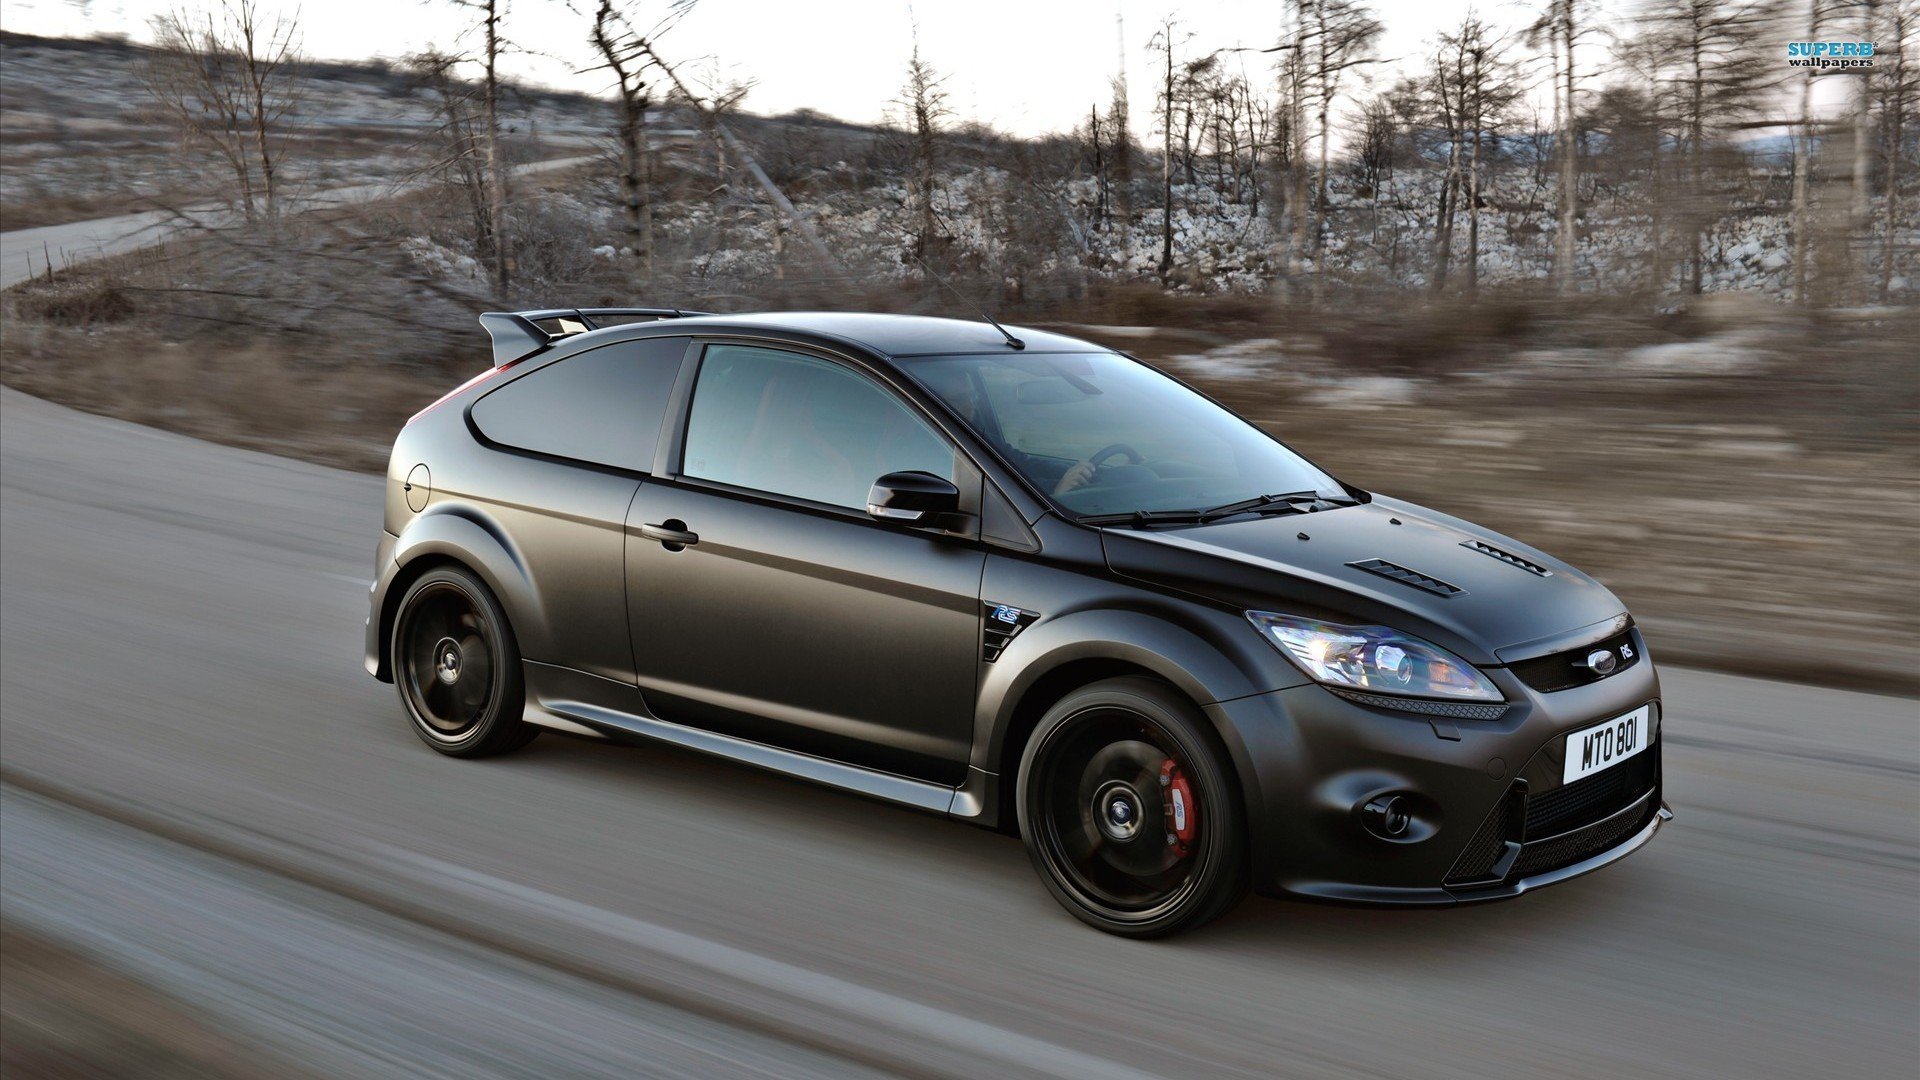 Ford Focus Rs Hd Wallpaper Background Image 1920x1080